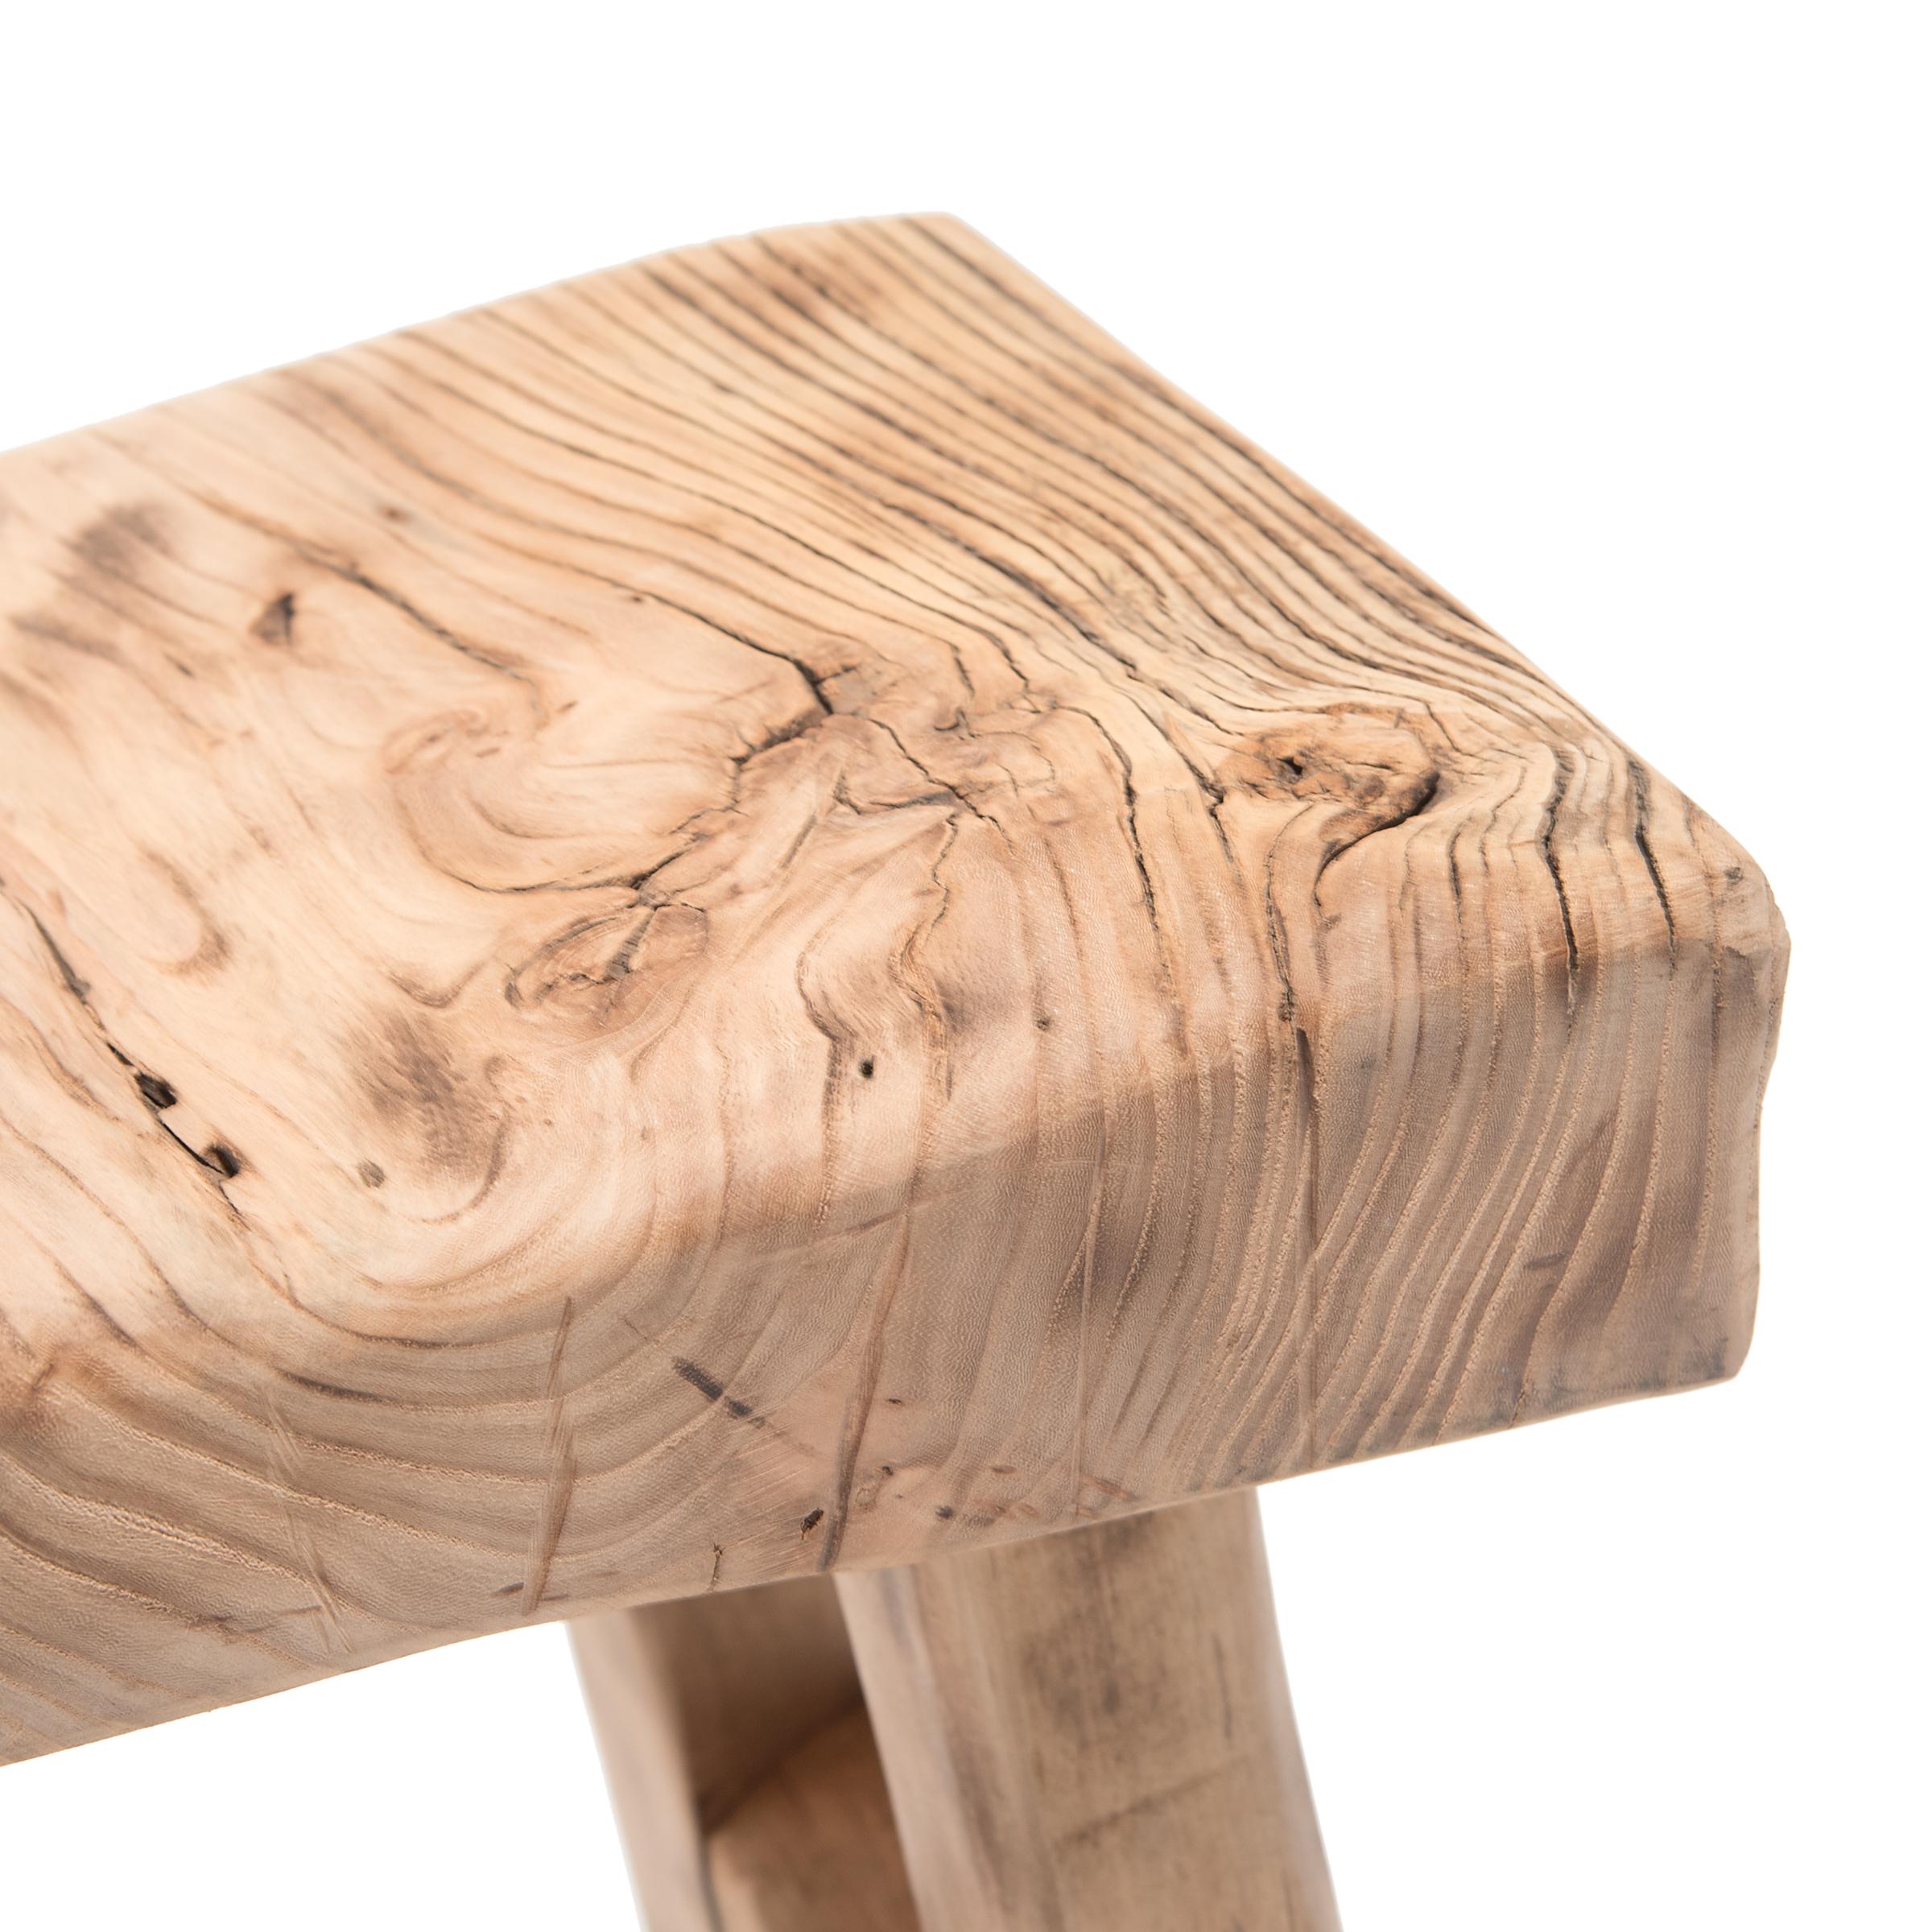 Reclaimed Wood Reclaimed Chinese Elm Courtyard Stool